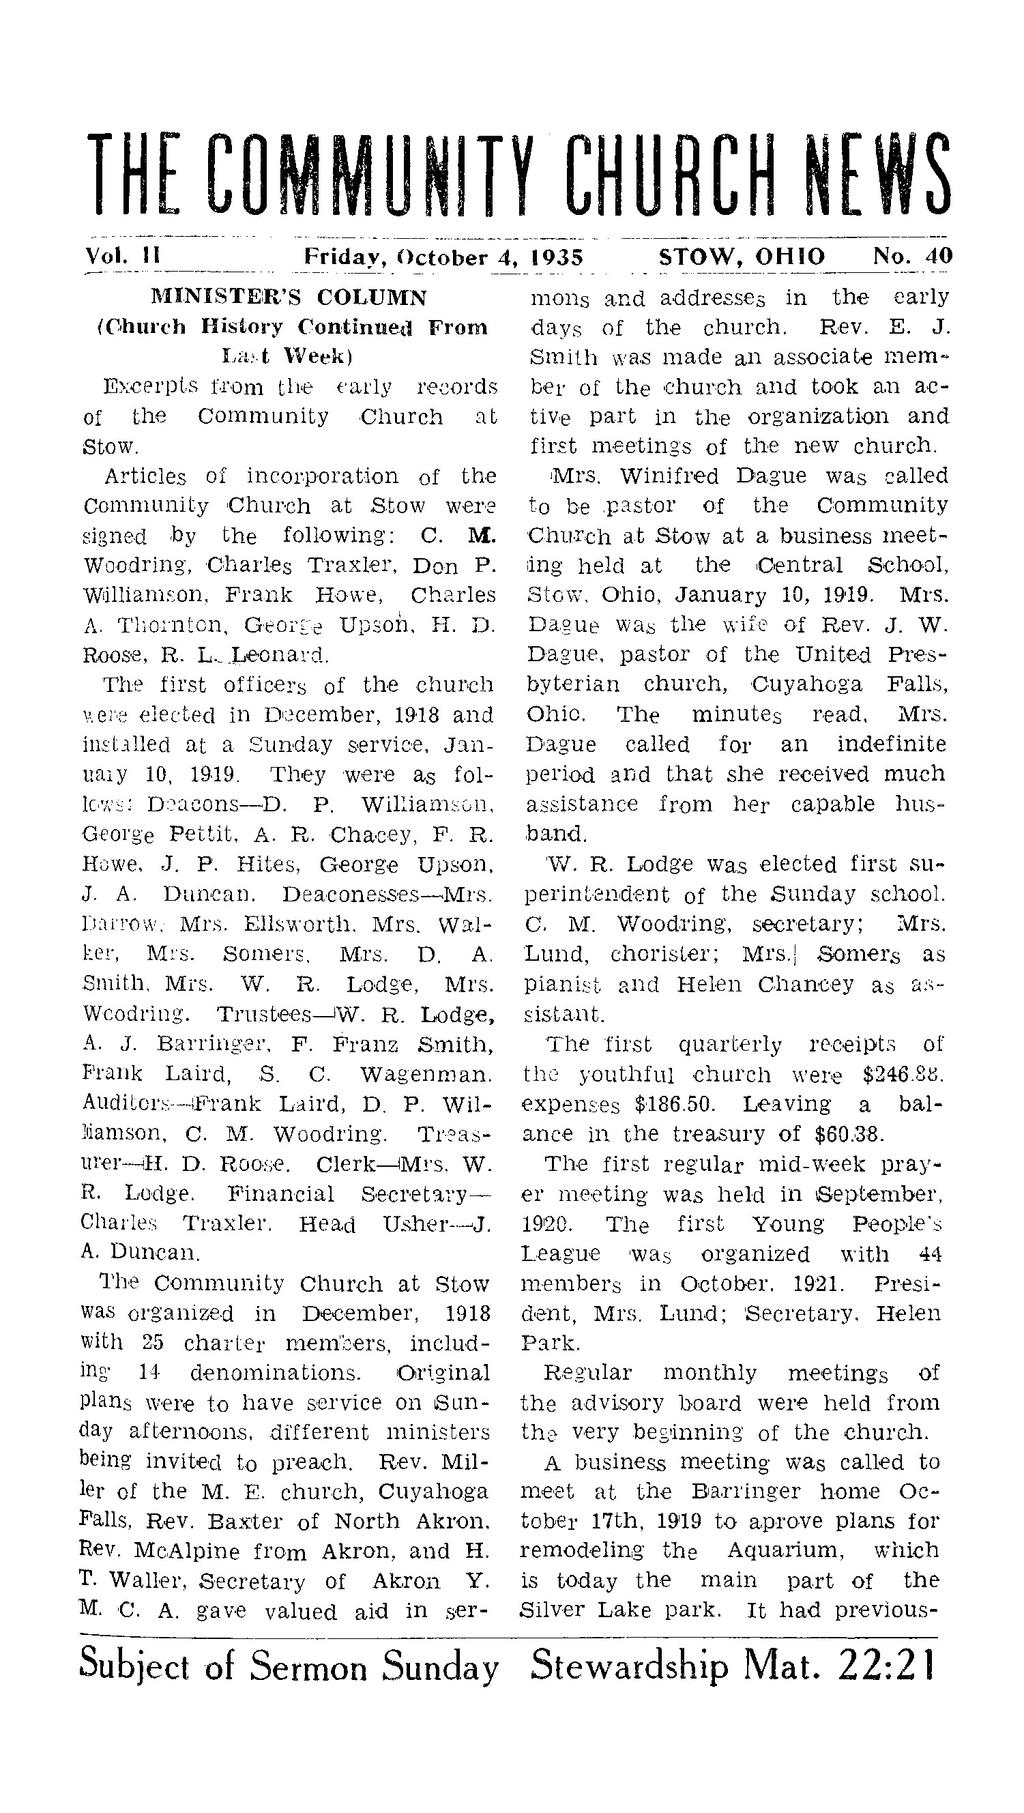 Vol. II Friday, October 4, 1935 STOW, OHIO No. 40 MINISTER'S COLUMN (Church History Continued From La.;-t Week) Excerpts from the early records of the Community Church at Stow.